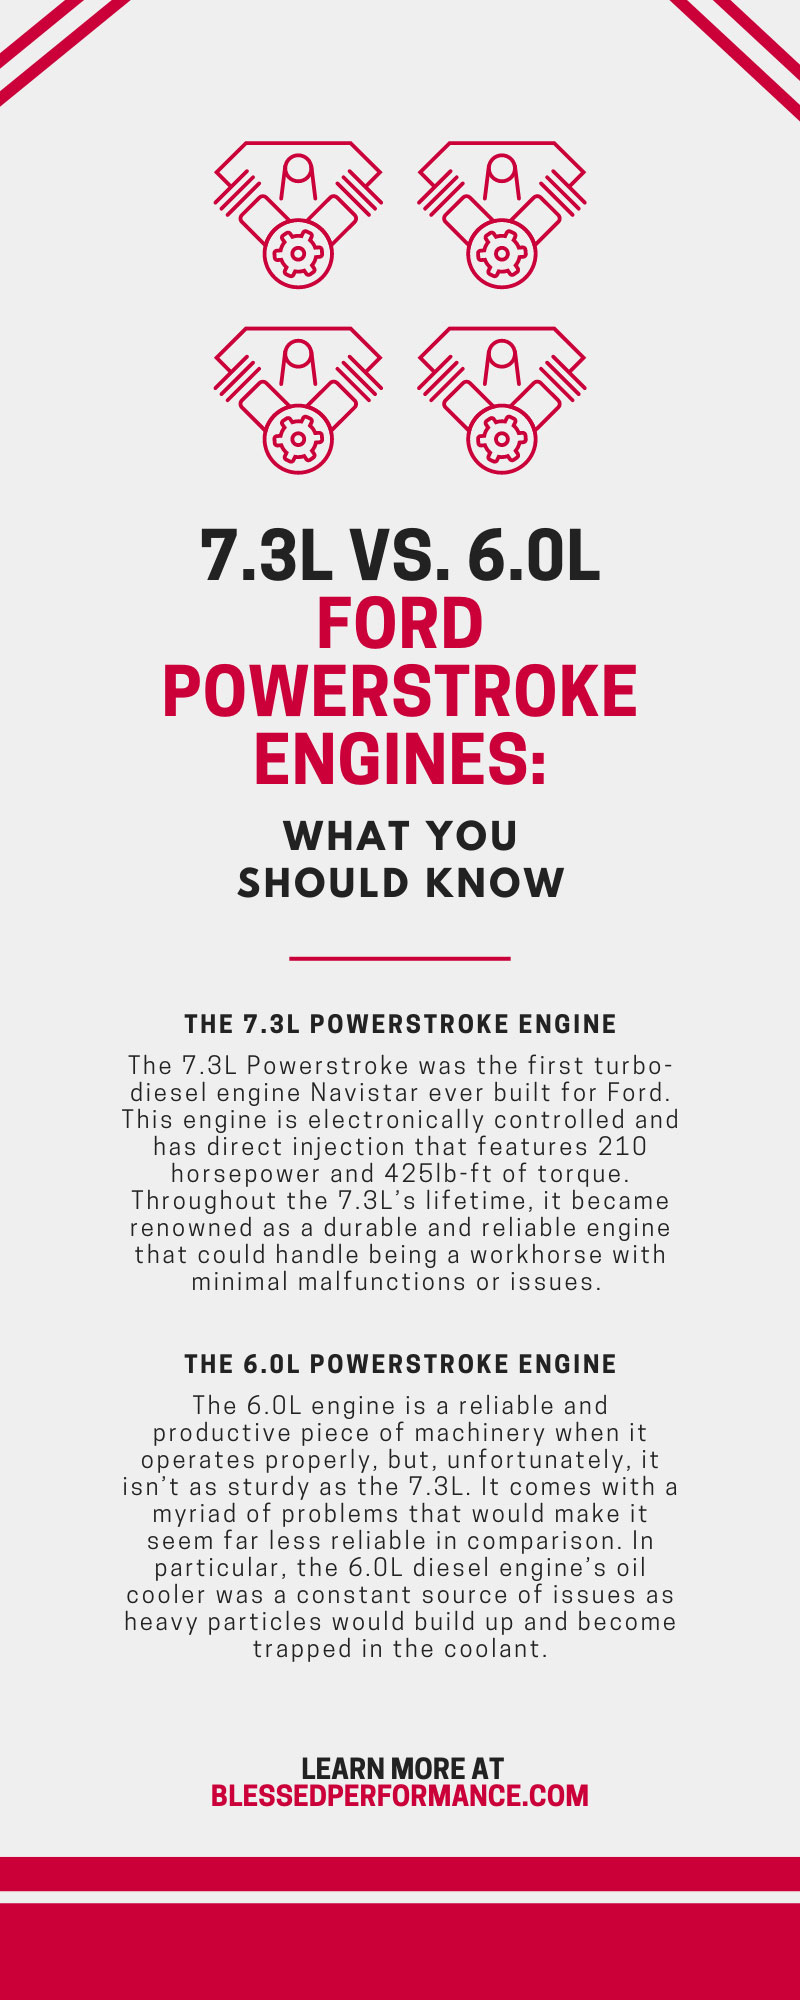 7.3L vs. 6.0L Ford Powerstroke Engines: What You Should Know